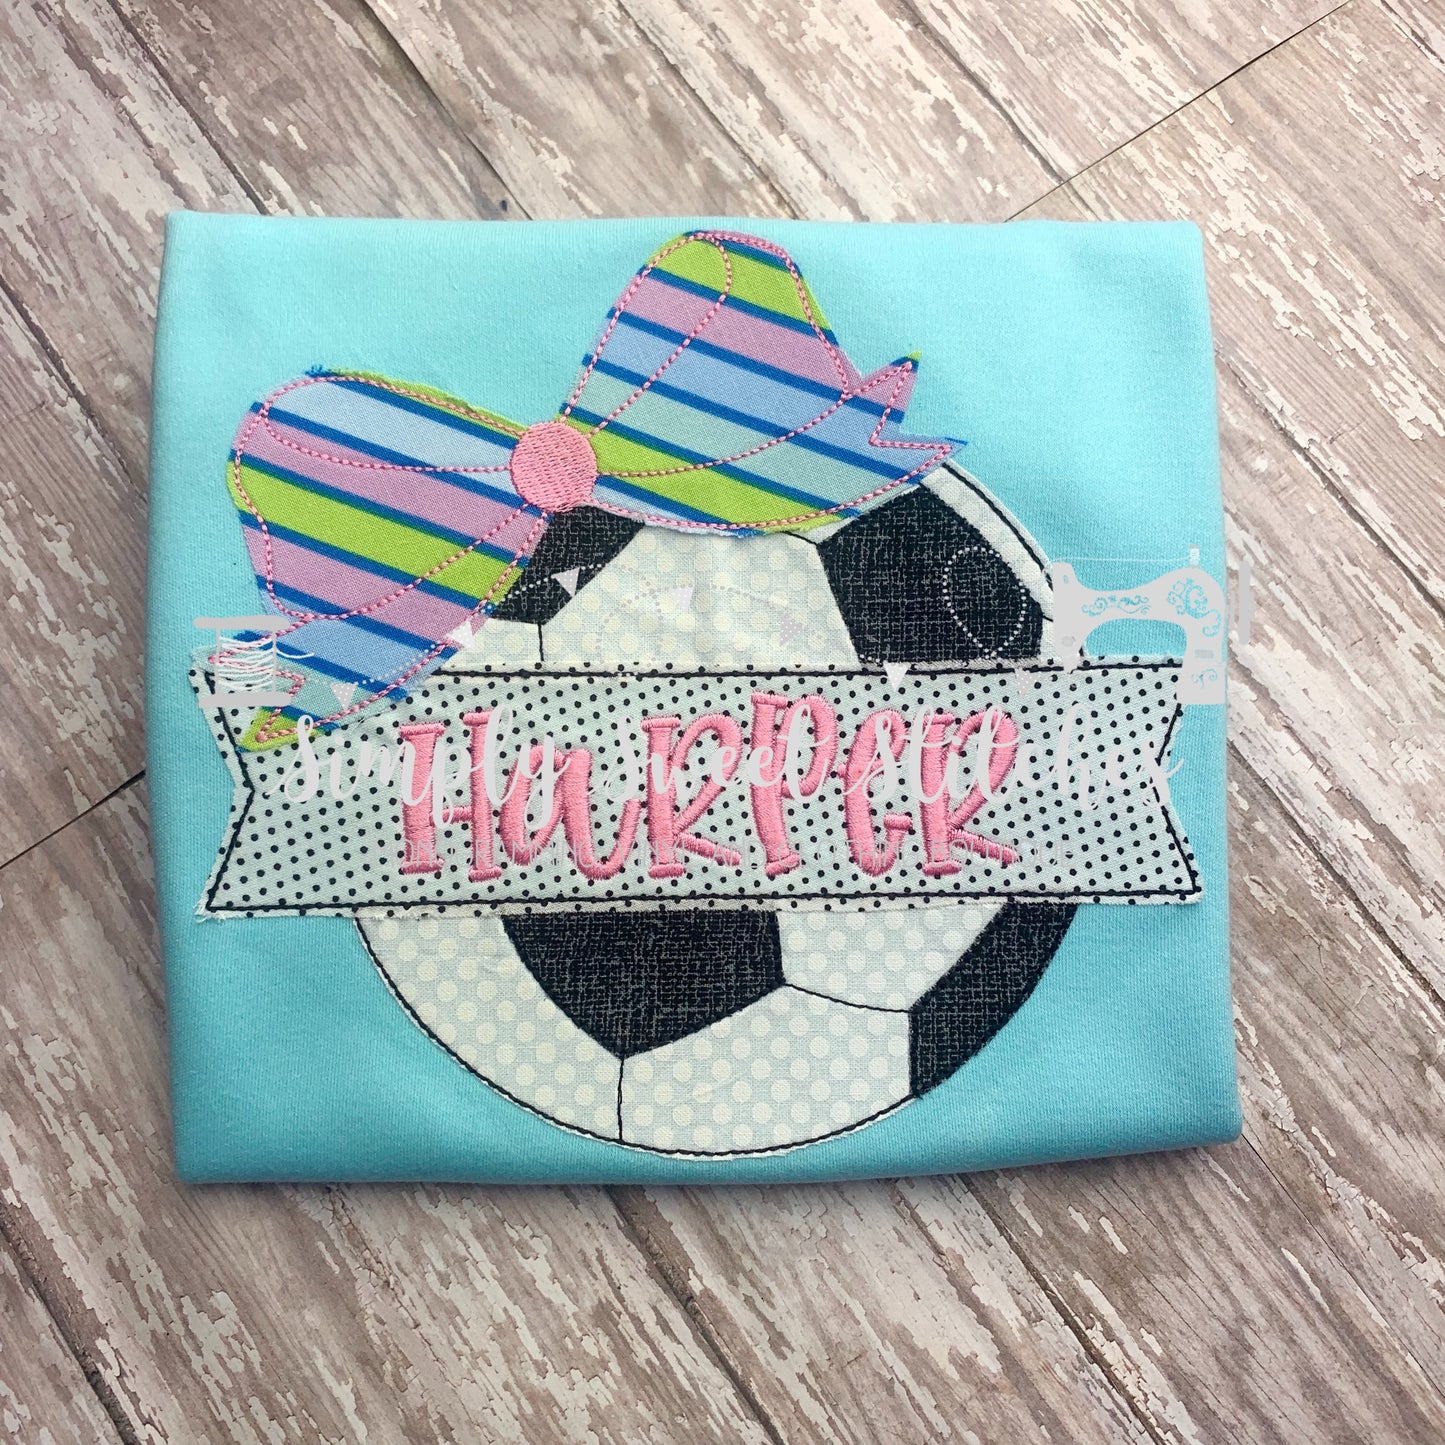 1331 - GIRL SOCCER BALL WITH BANNER - APPLIQUE CHILD SHIRT